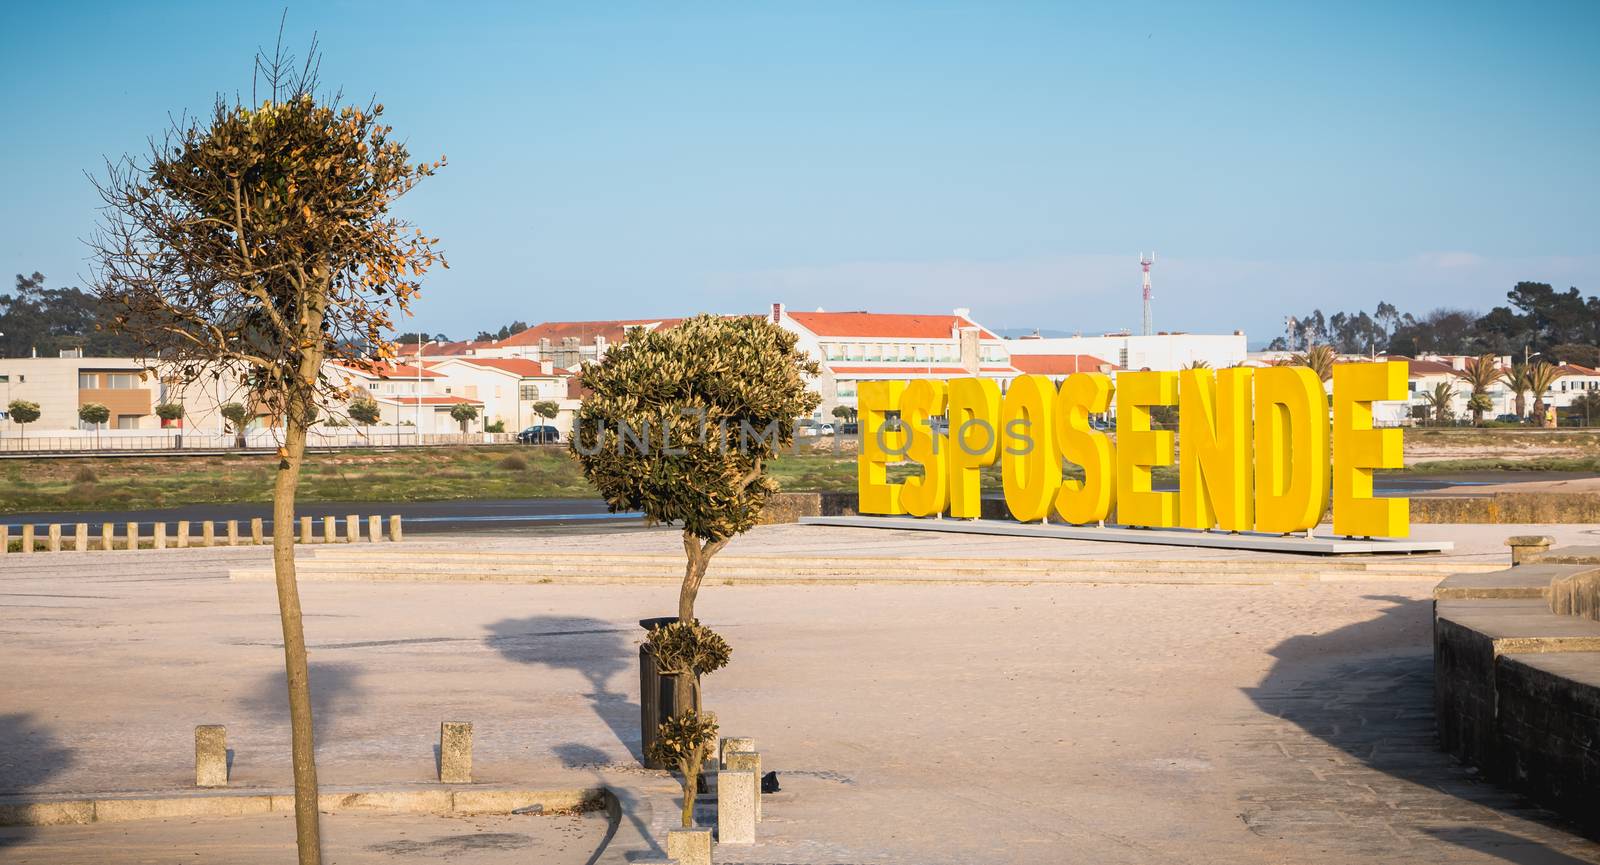 Esposende, Portugal - May 8, 2018: Big yellow block letters spelling Esposende on the beach on a spring day